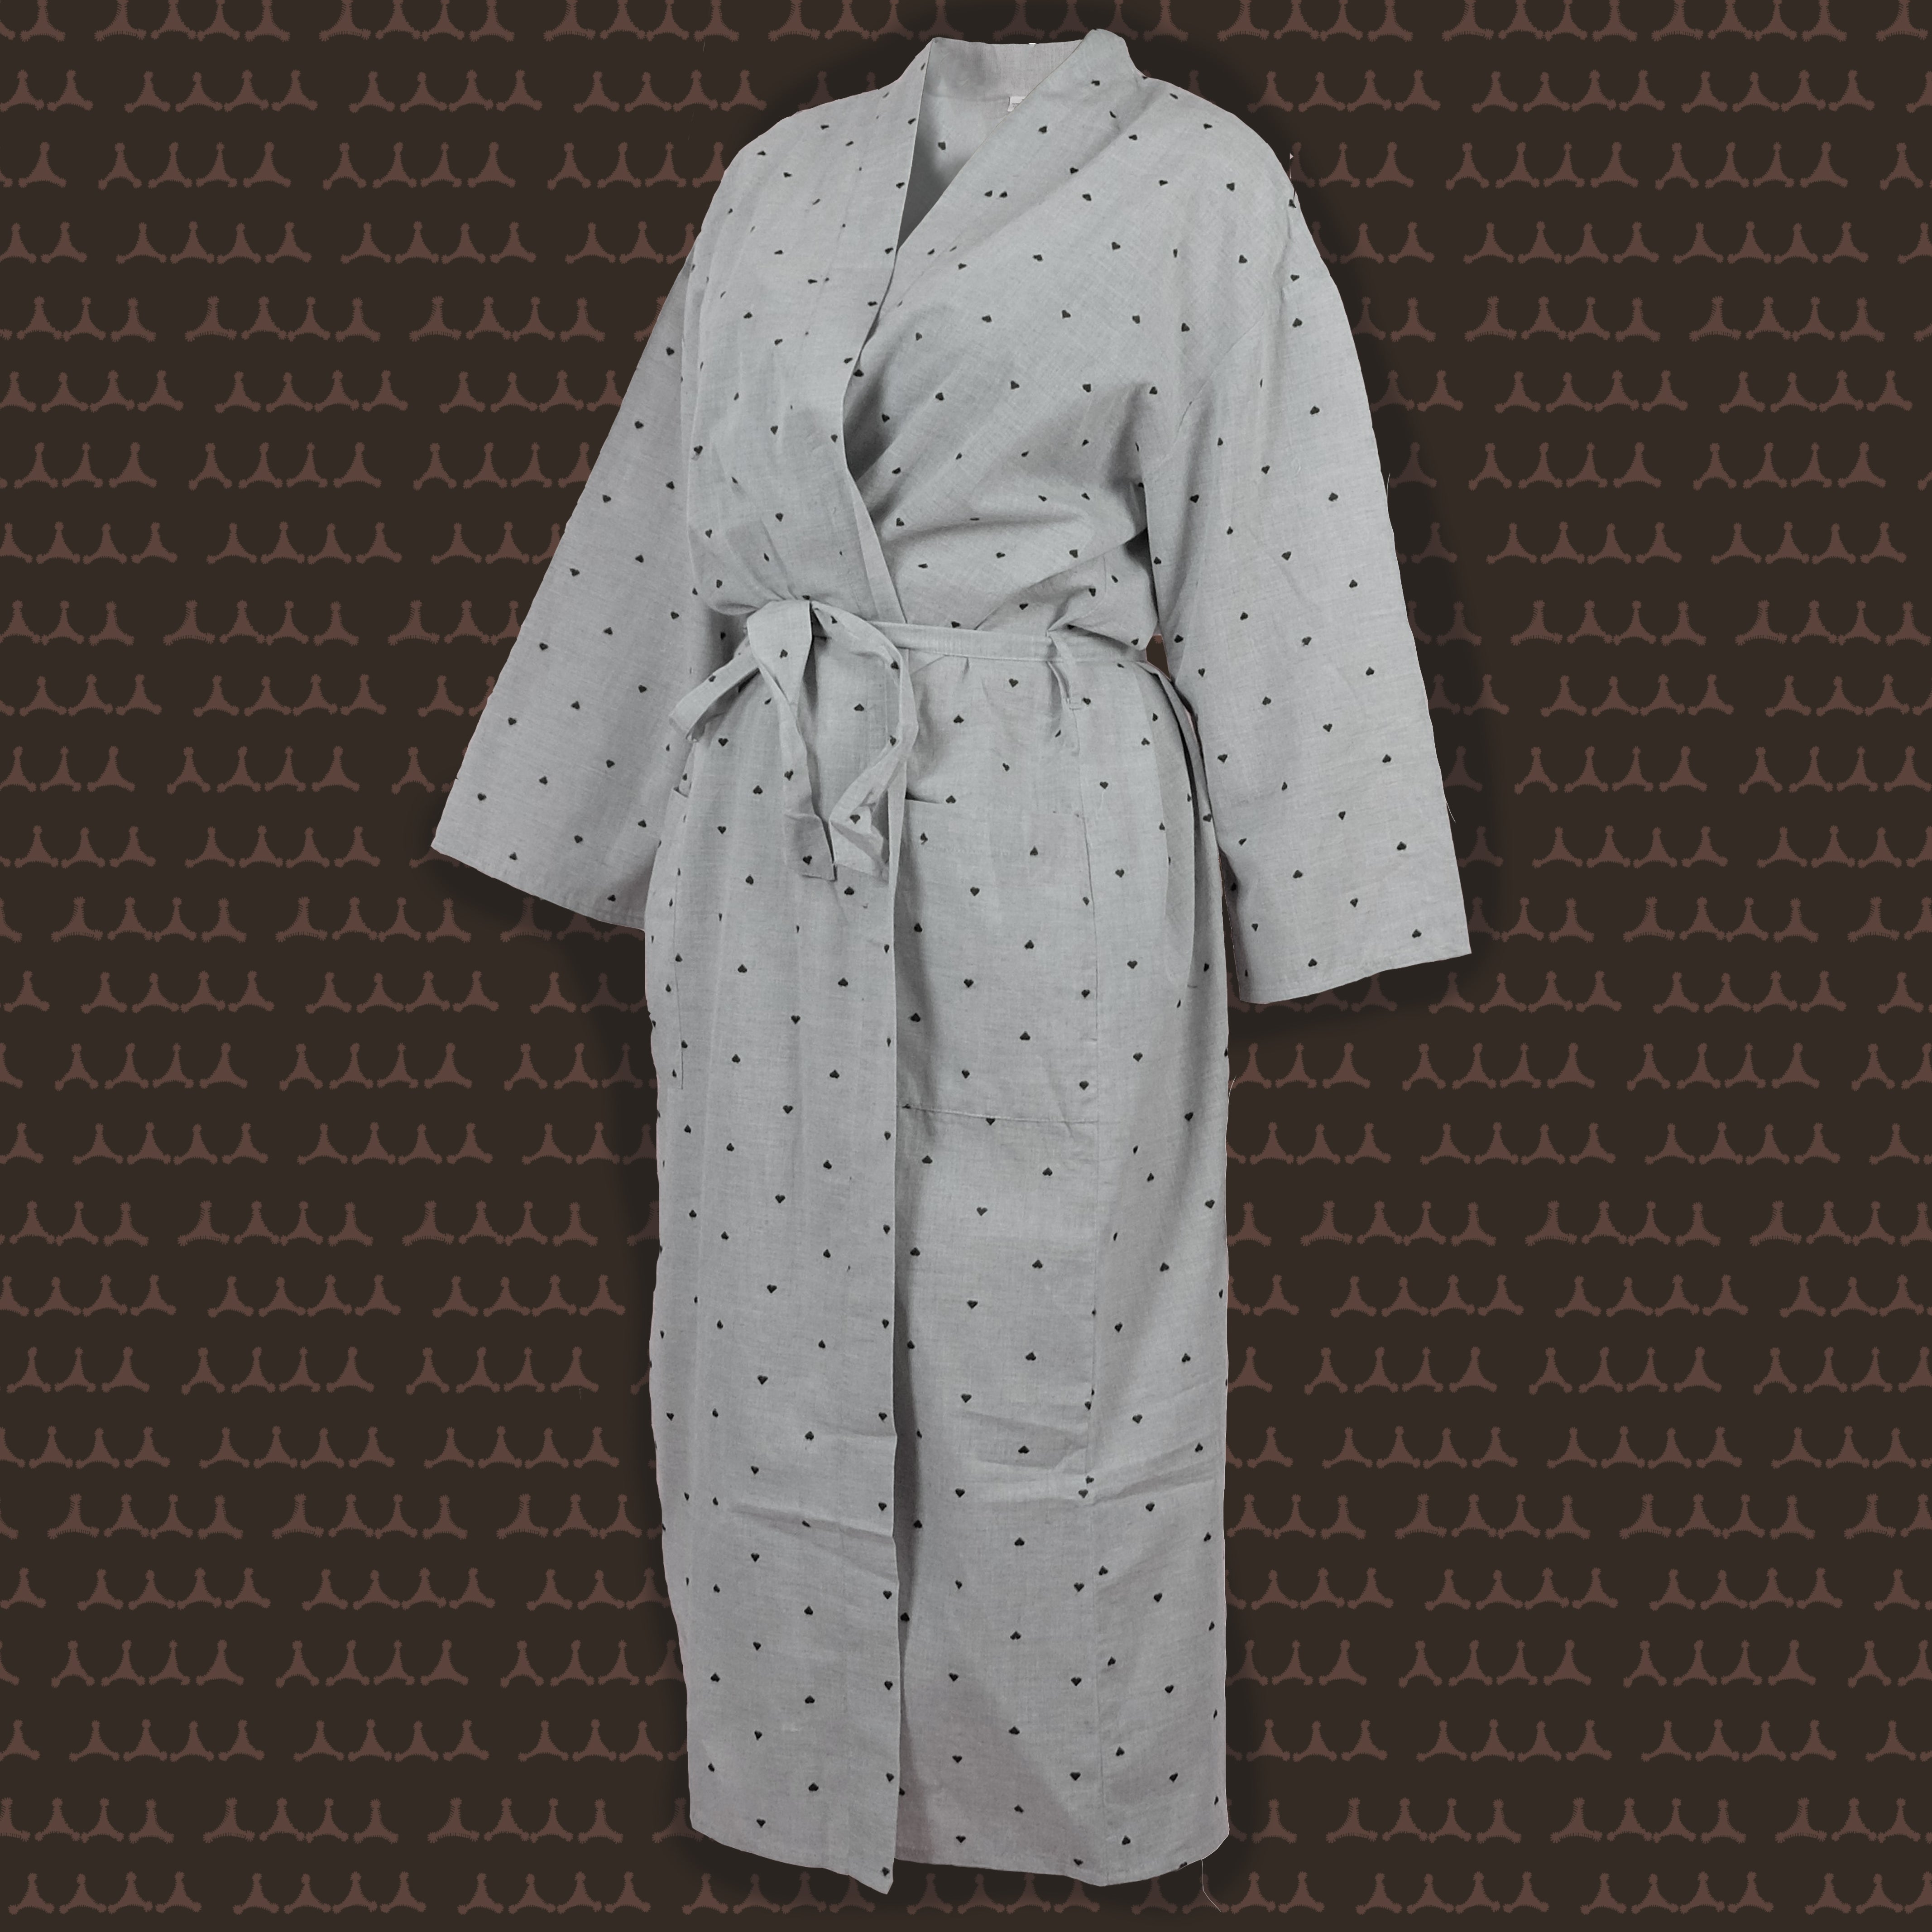 Washed Linen Robe in Cream – Mary Claret Studio